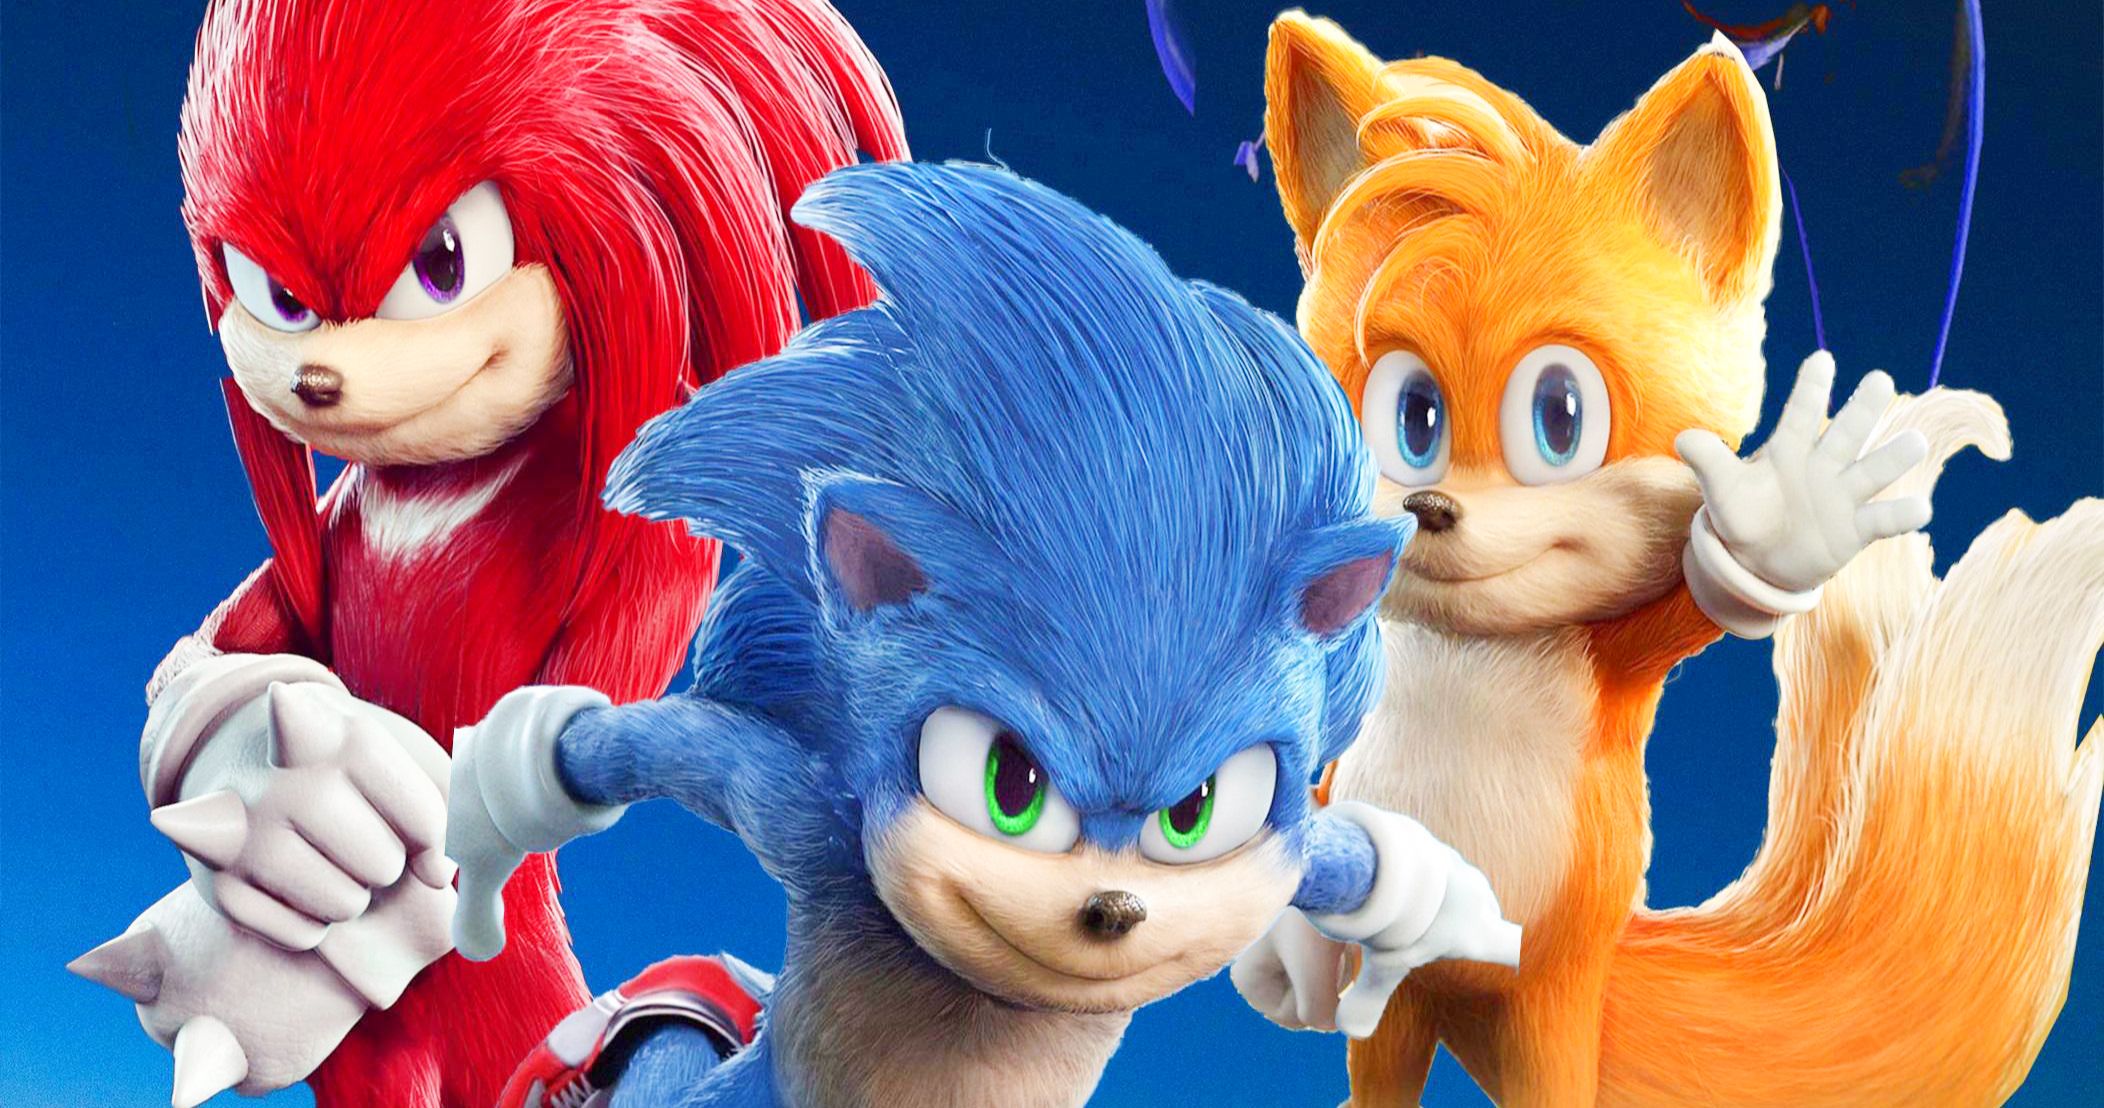 Sonic the Hedgehog 3' Official Release Date